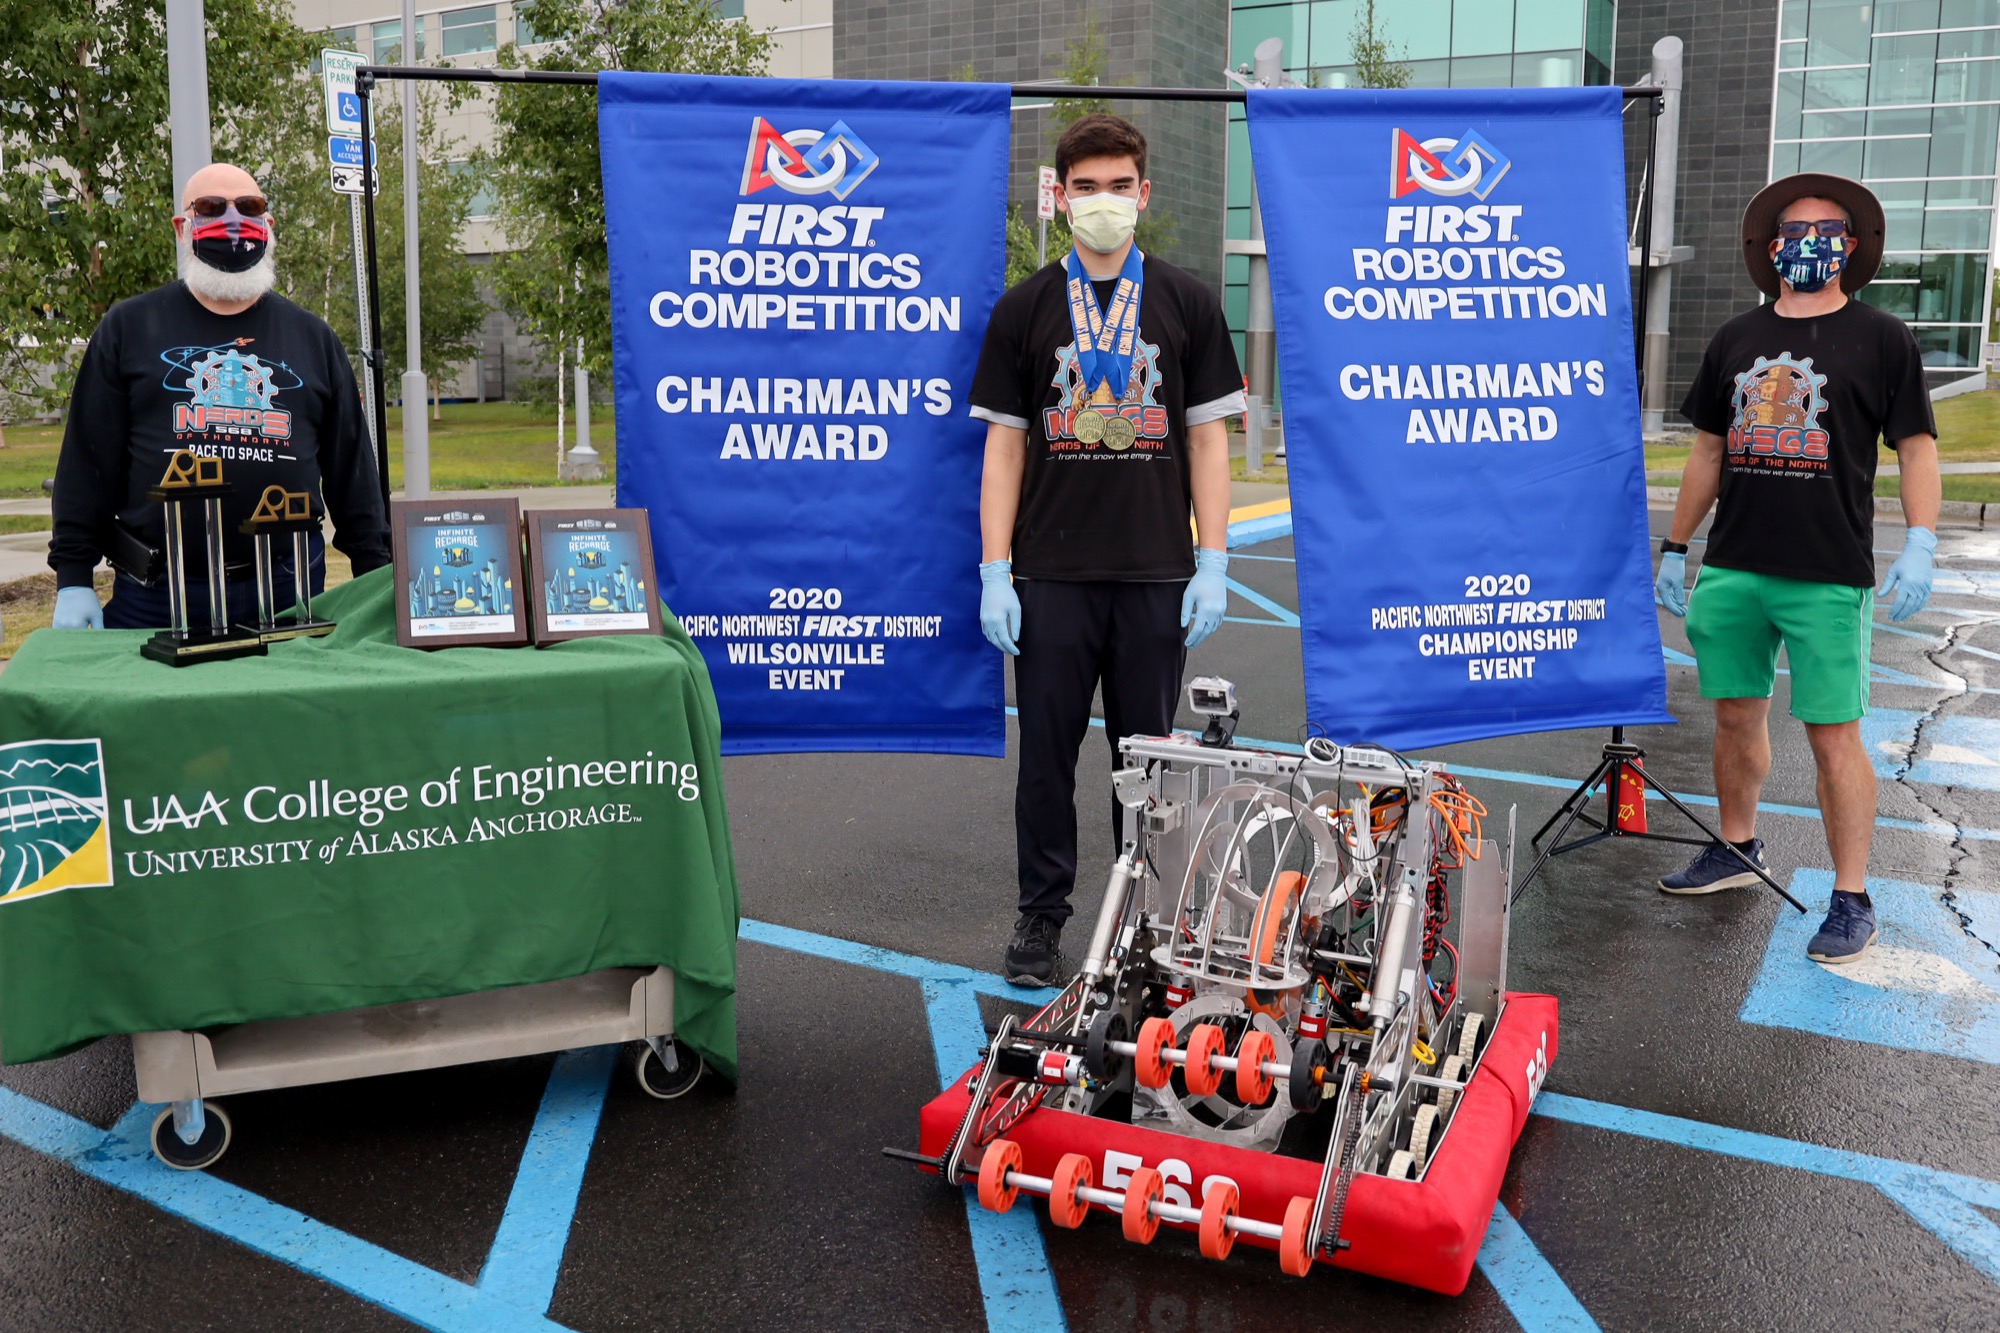 Students from the statewide high school FIRST Robotics Competition team, 568 (FRC 568), accept competition awards from a robot, social-distancing style.